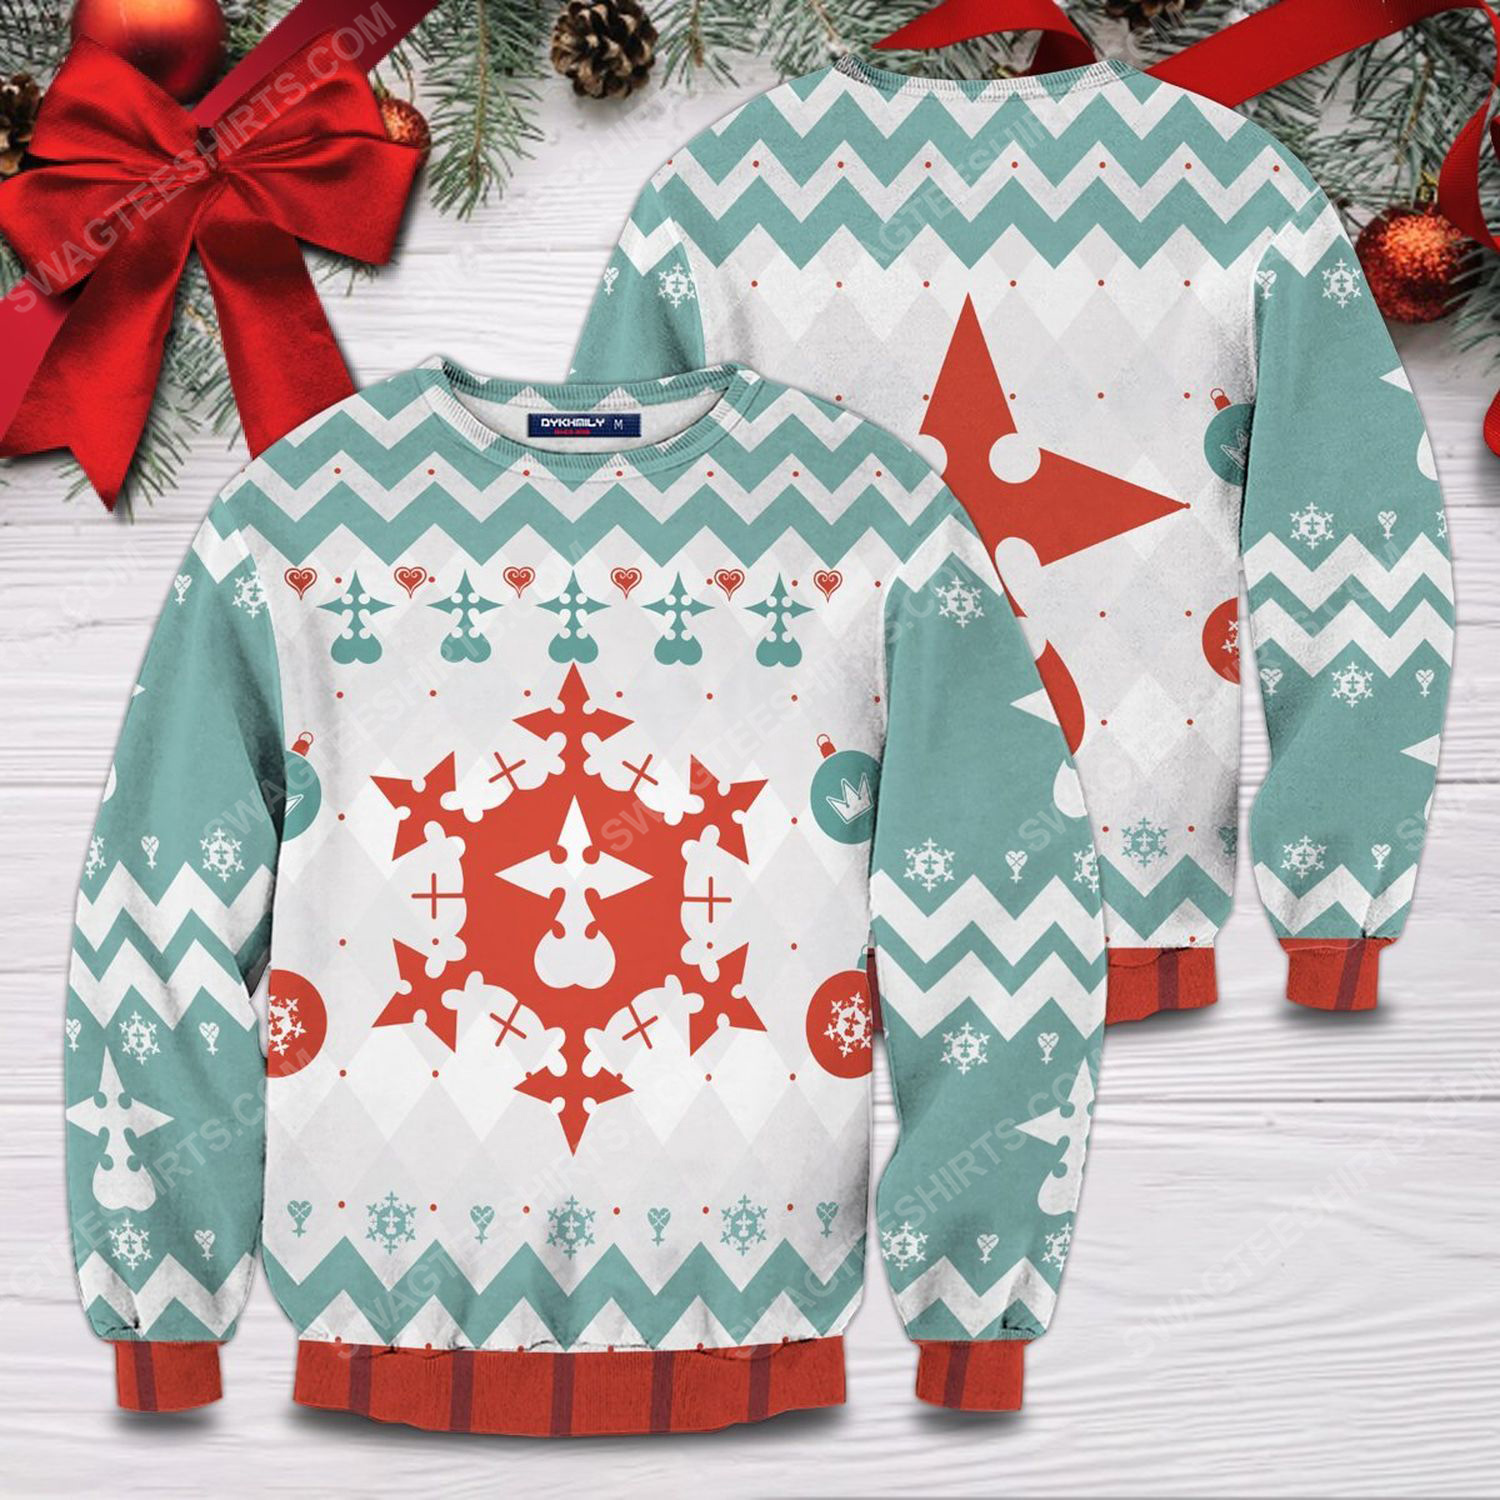 Merry xemnas full printing ugly christmas sweater 2